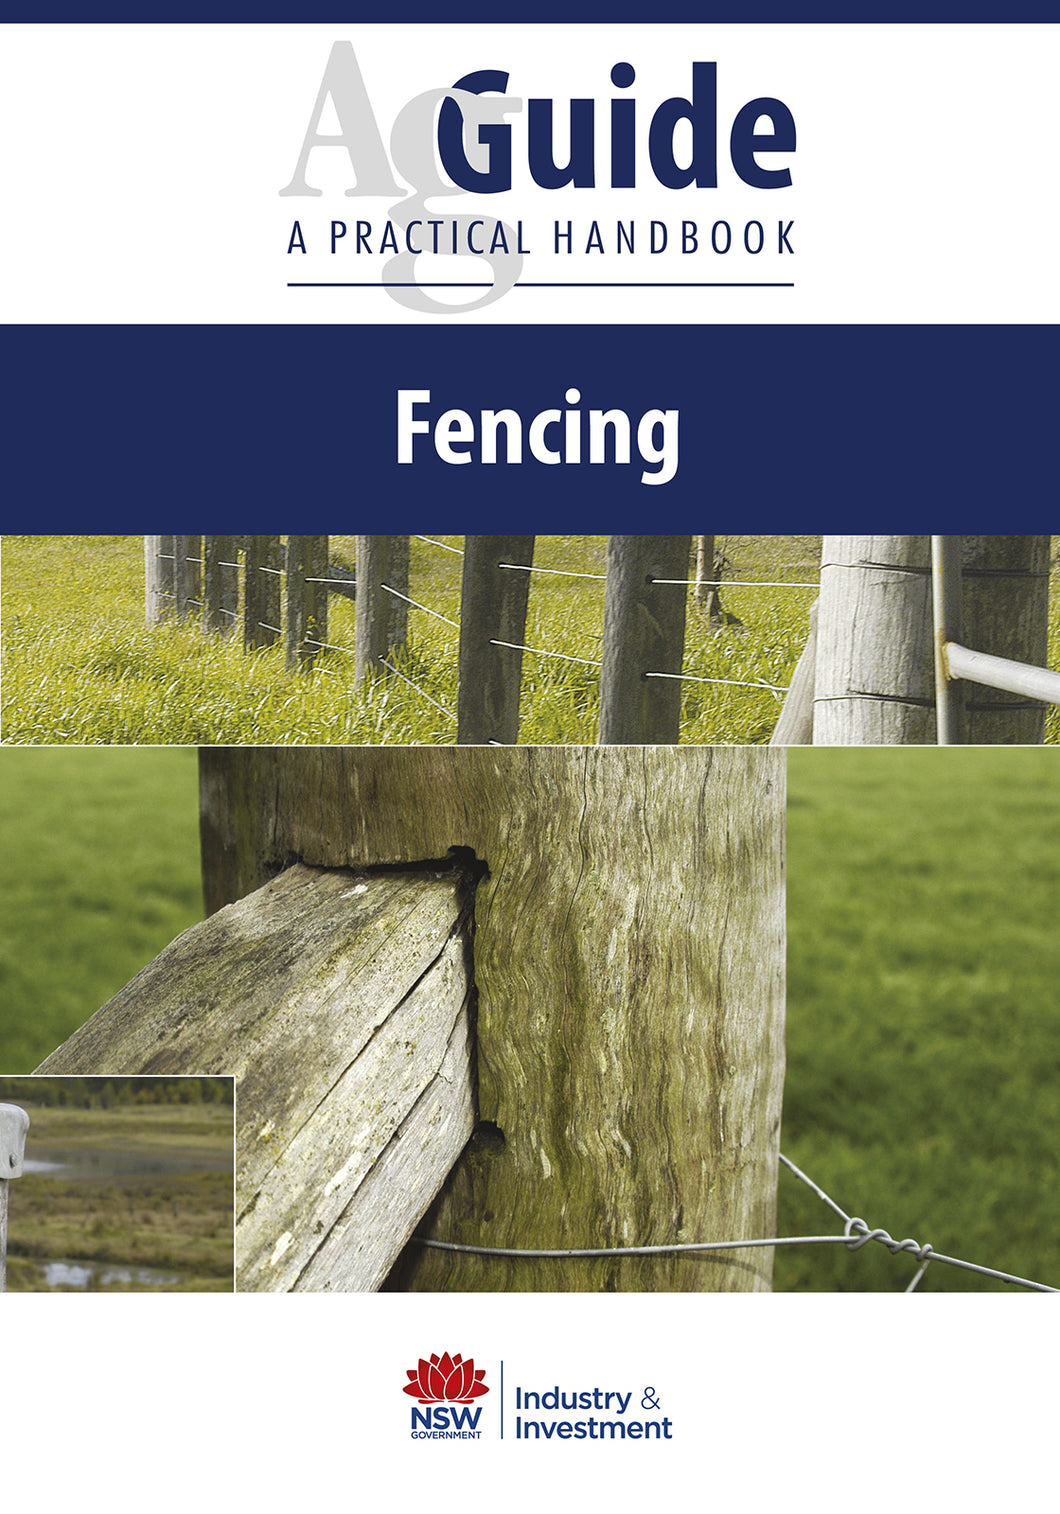 AG Fencing bookcover